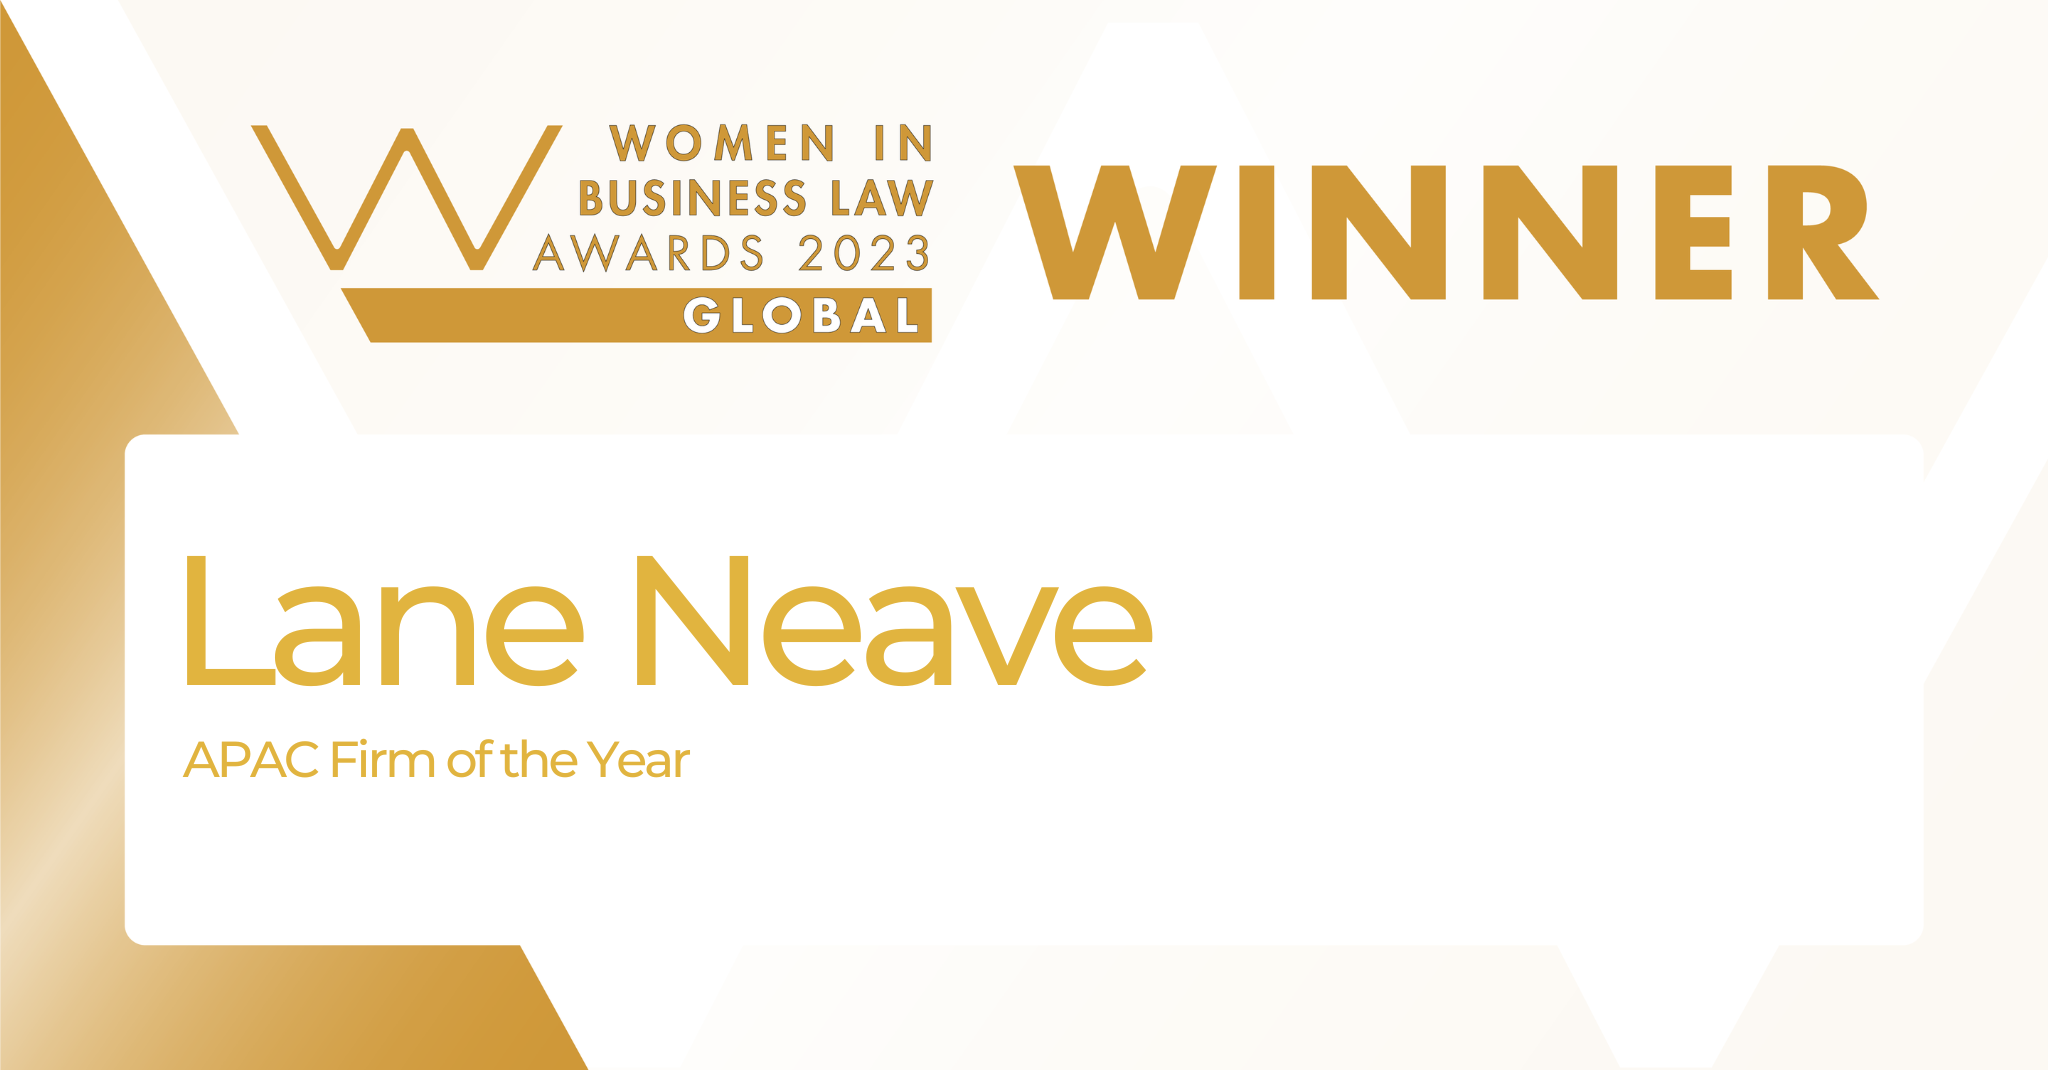 Lane Neave named APAC Firm of the Year at Global Women in Business Law